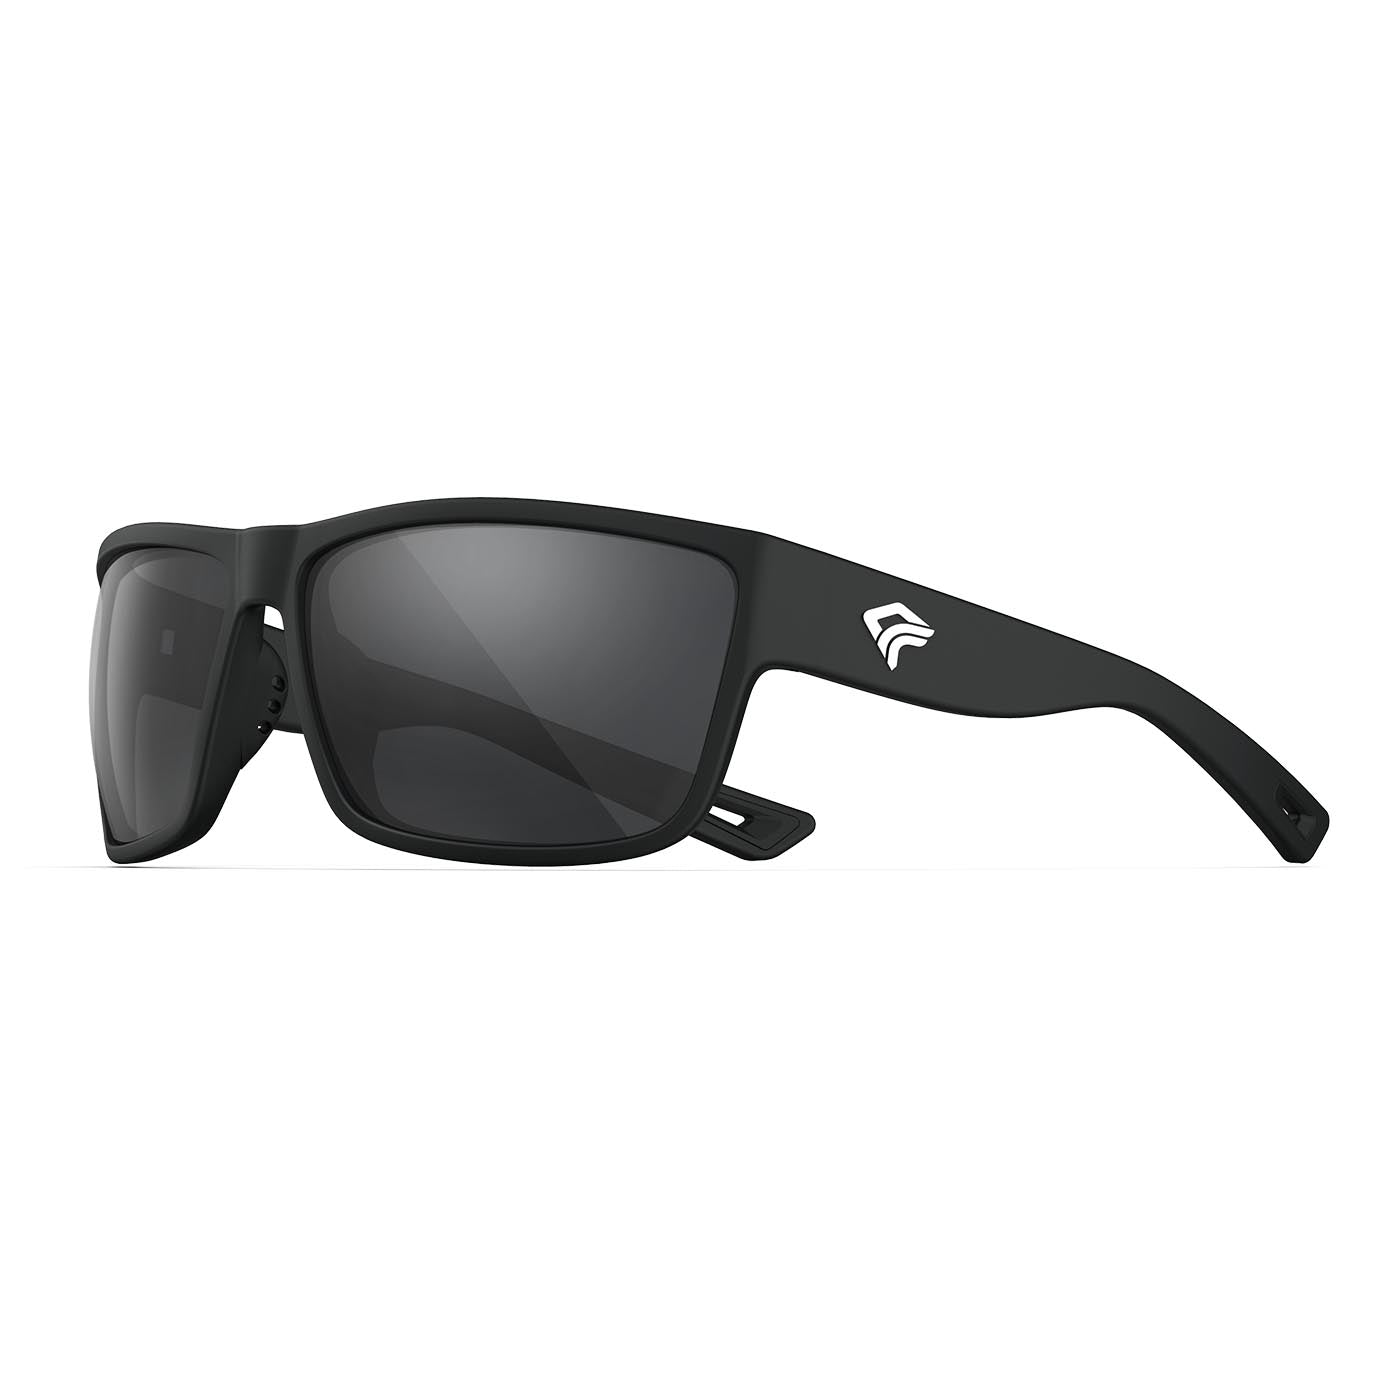 Wild Polarized Sports Sunglasses with Lifetime Warranty - Adjustable and  Flexible Frame - Ideal for Men and Women - Ideal for Cycling, Running,  Golf, and Fishing - Matte Black Frame & Black Mirror Lens